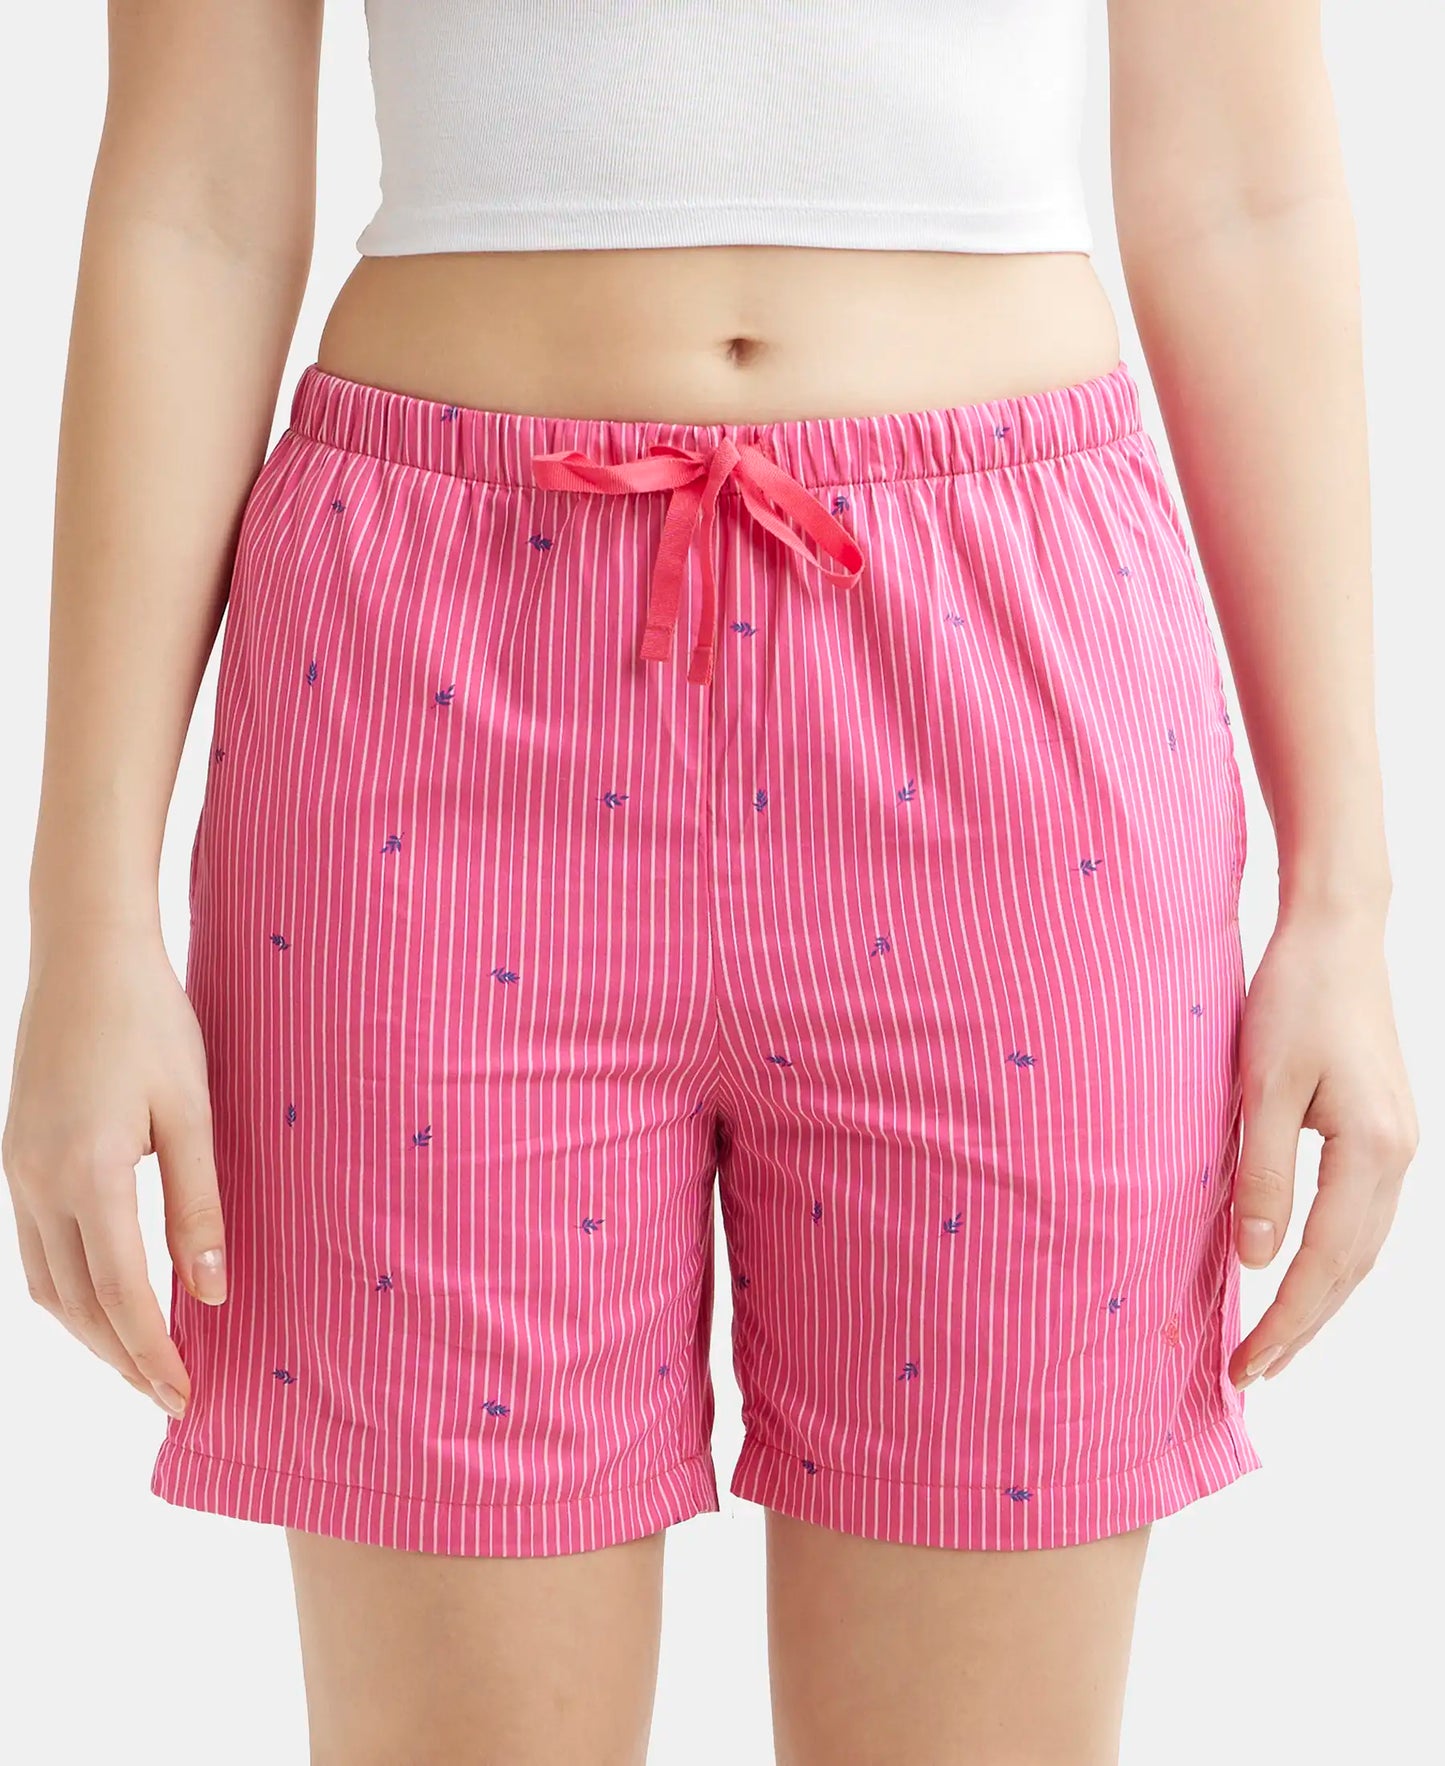 Super Combed Cotton Yarn Dyed Woven Relaxed Fit Striped Shorts with Side Pockets - Ruby Assorted Checks-1